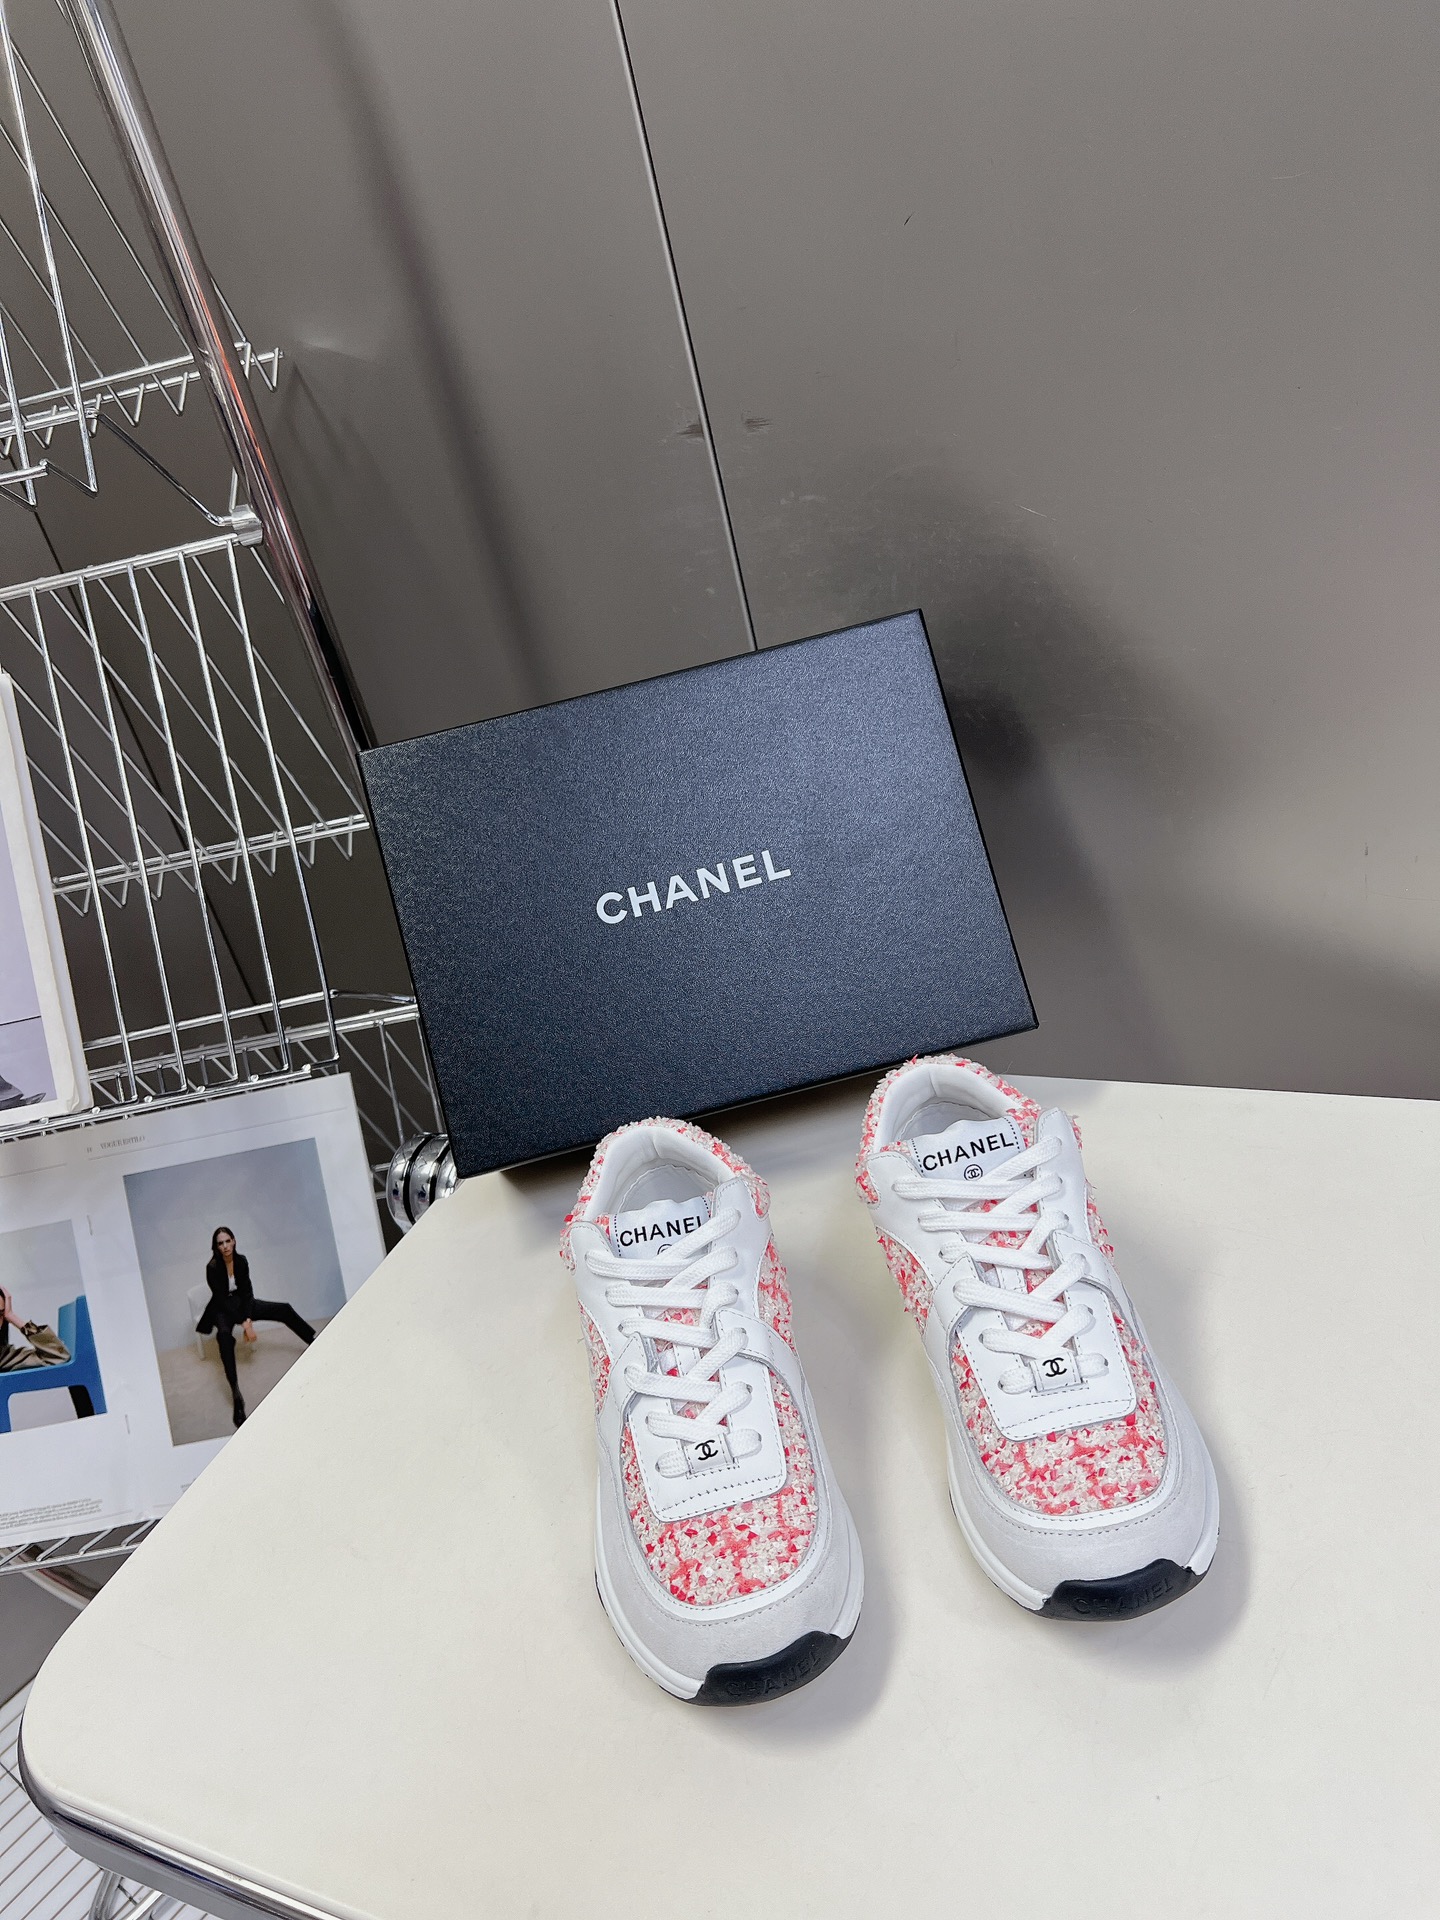 Chanel Shoes Sneakers Sweatpants